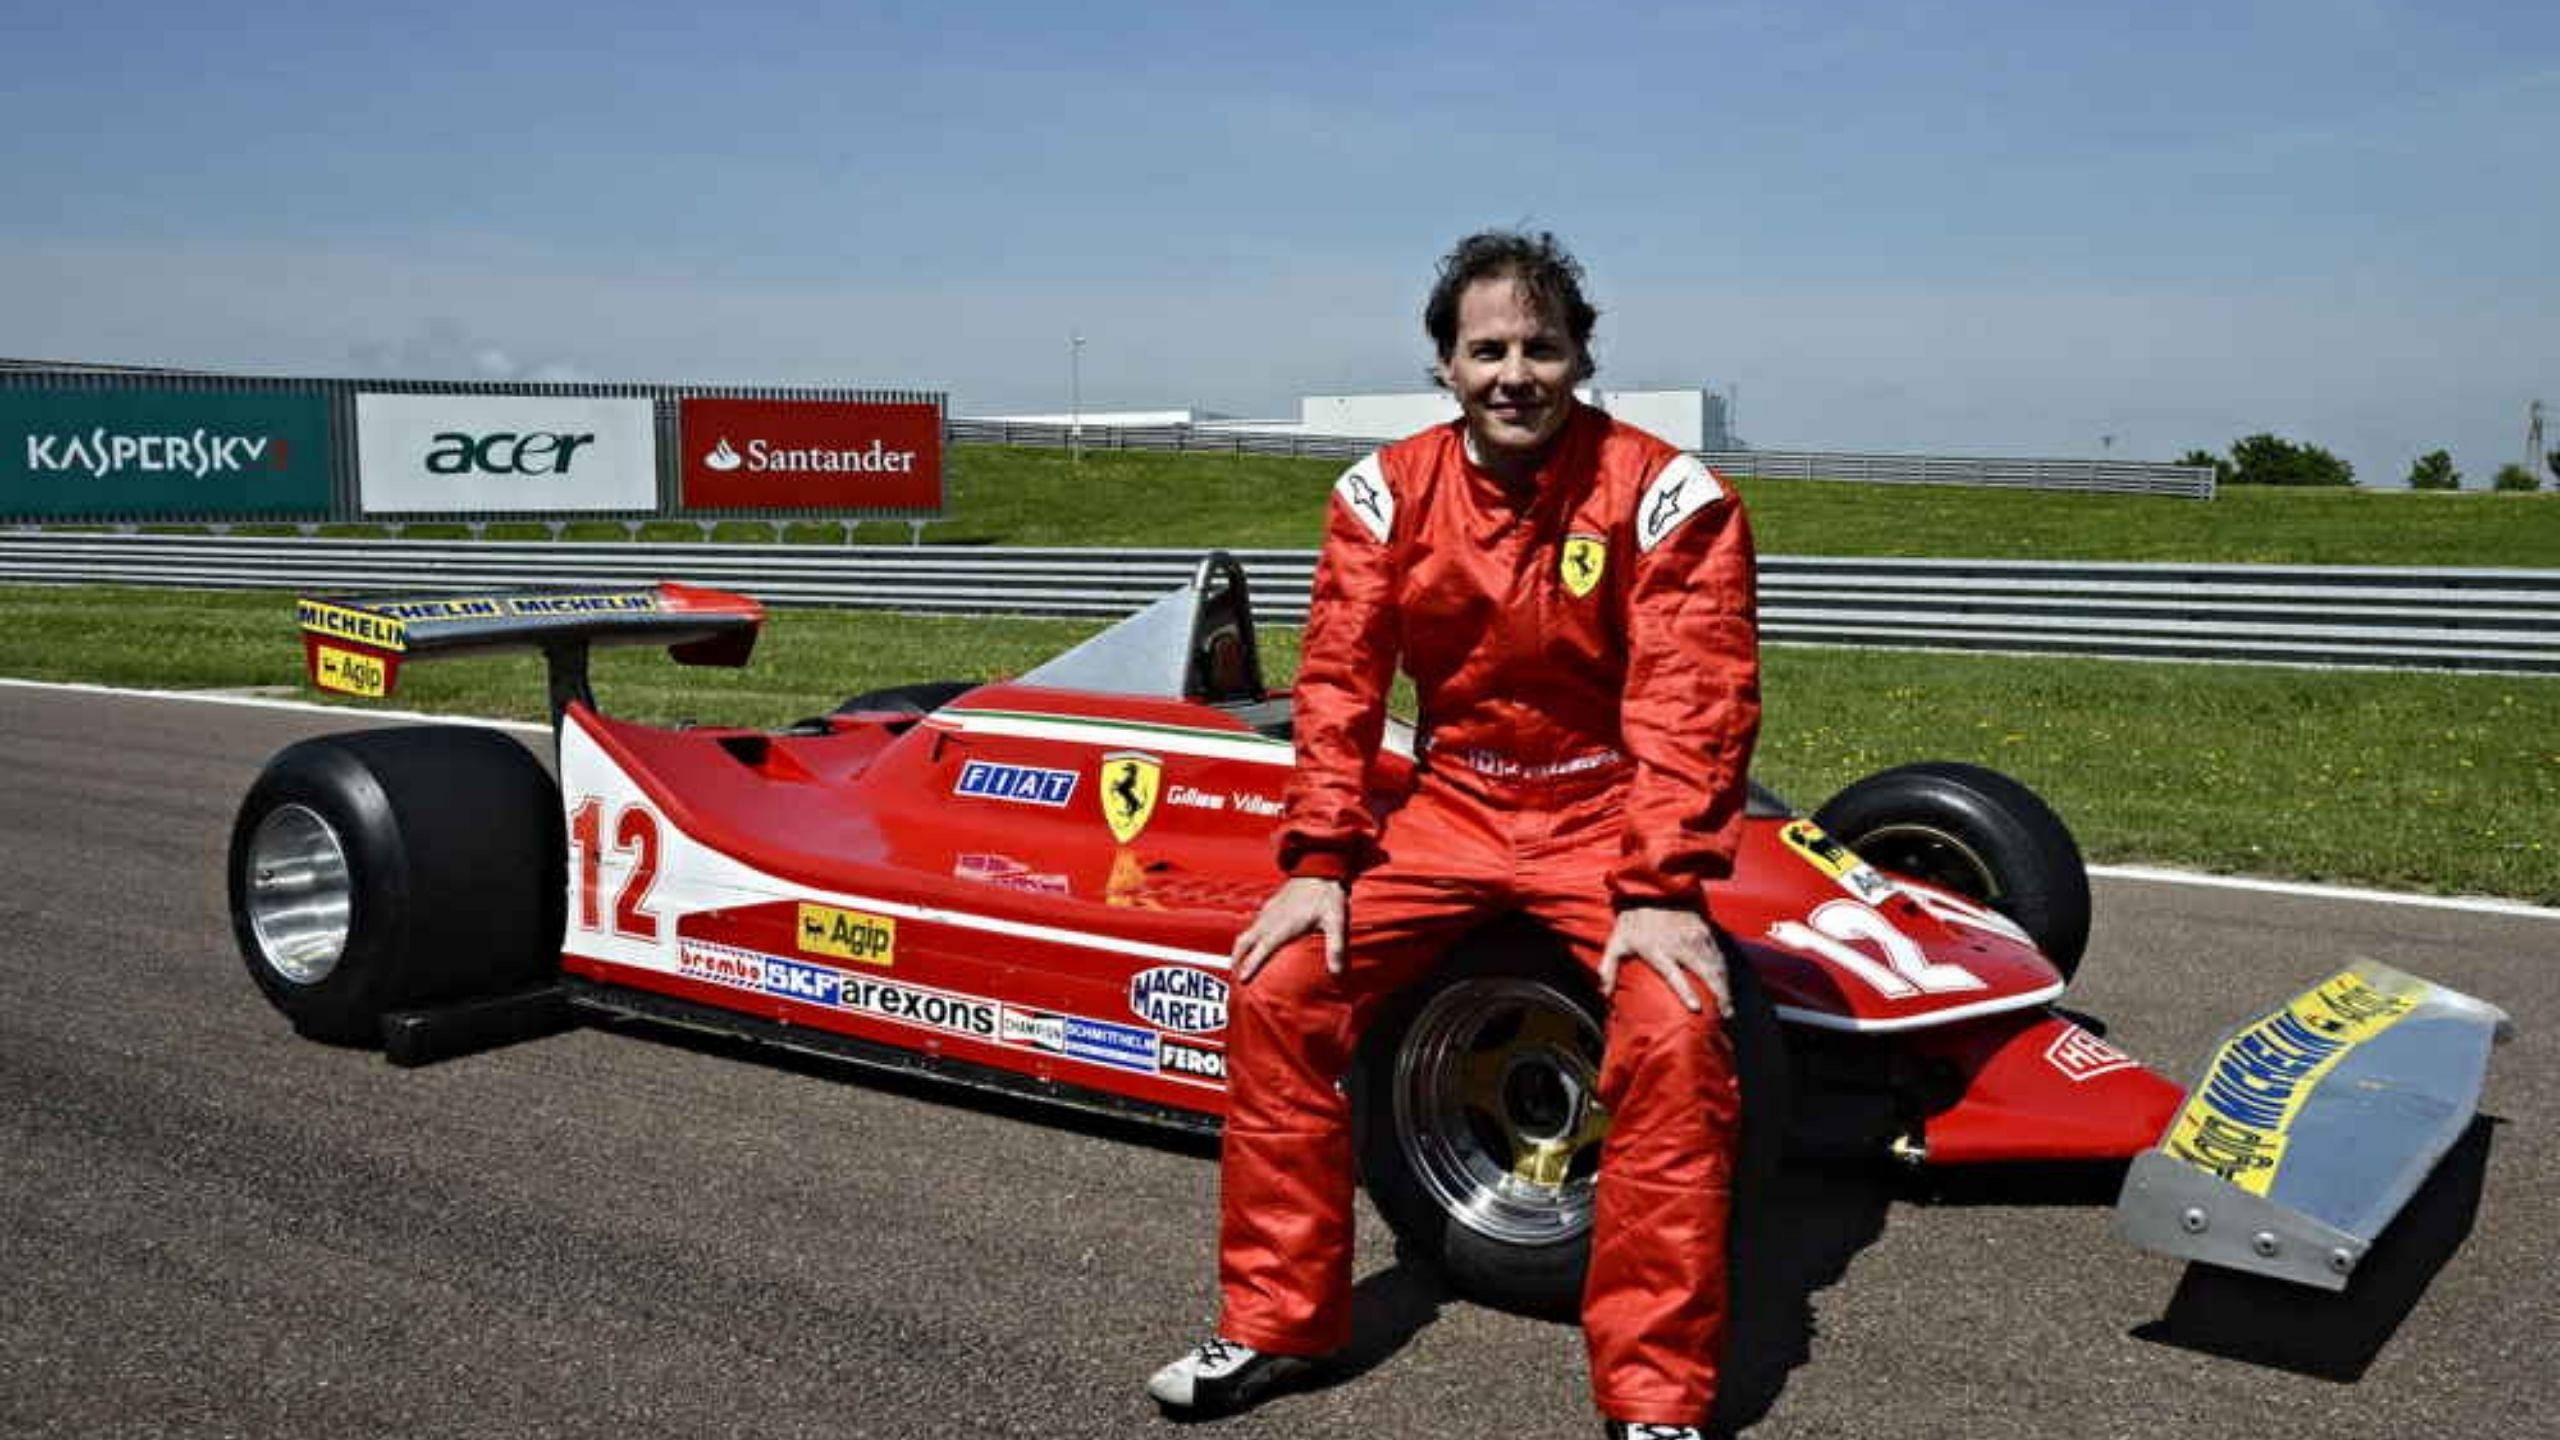 “Apart from Leclerc, everyone had money in their hands when they entered the Academy” - Former champion Jacques Villeneuve does a critical analysis of the Ferrari Driver Academy